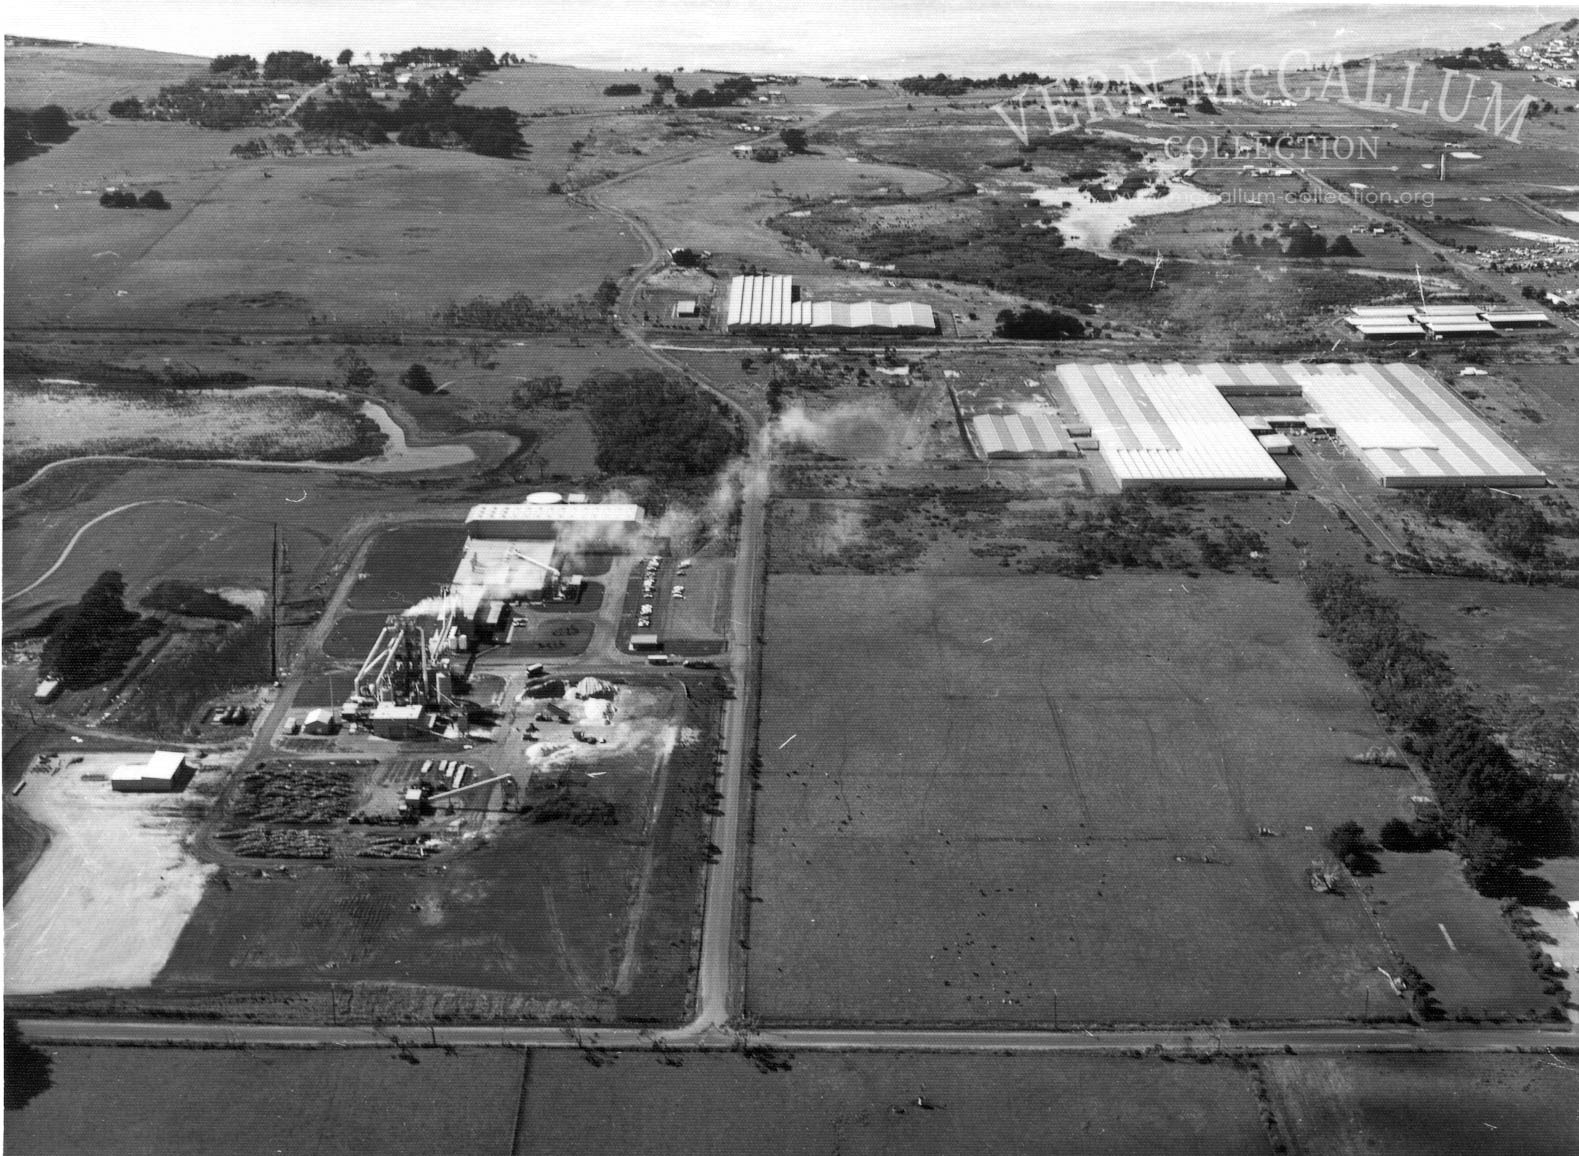 At Darts road C.S.R. chip board works and the woolstores. The intersection of Darts road and North Portland School road can be seen in the bottom of the photo.